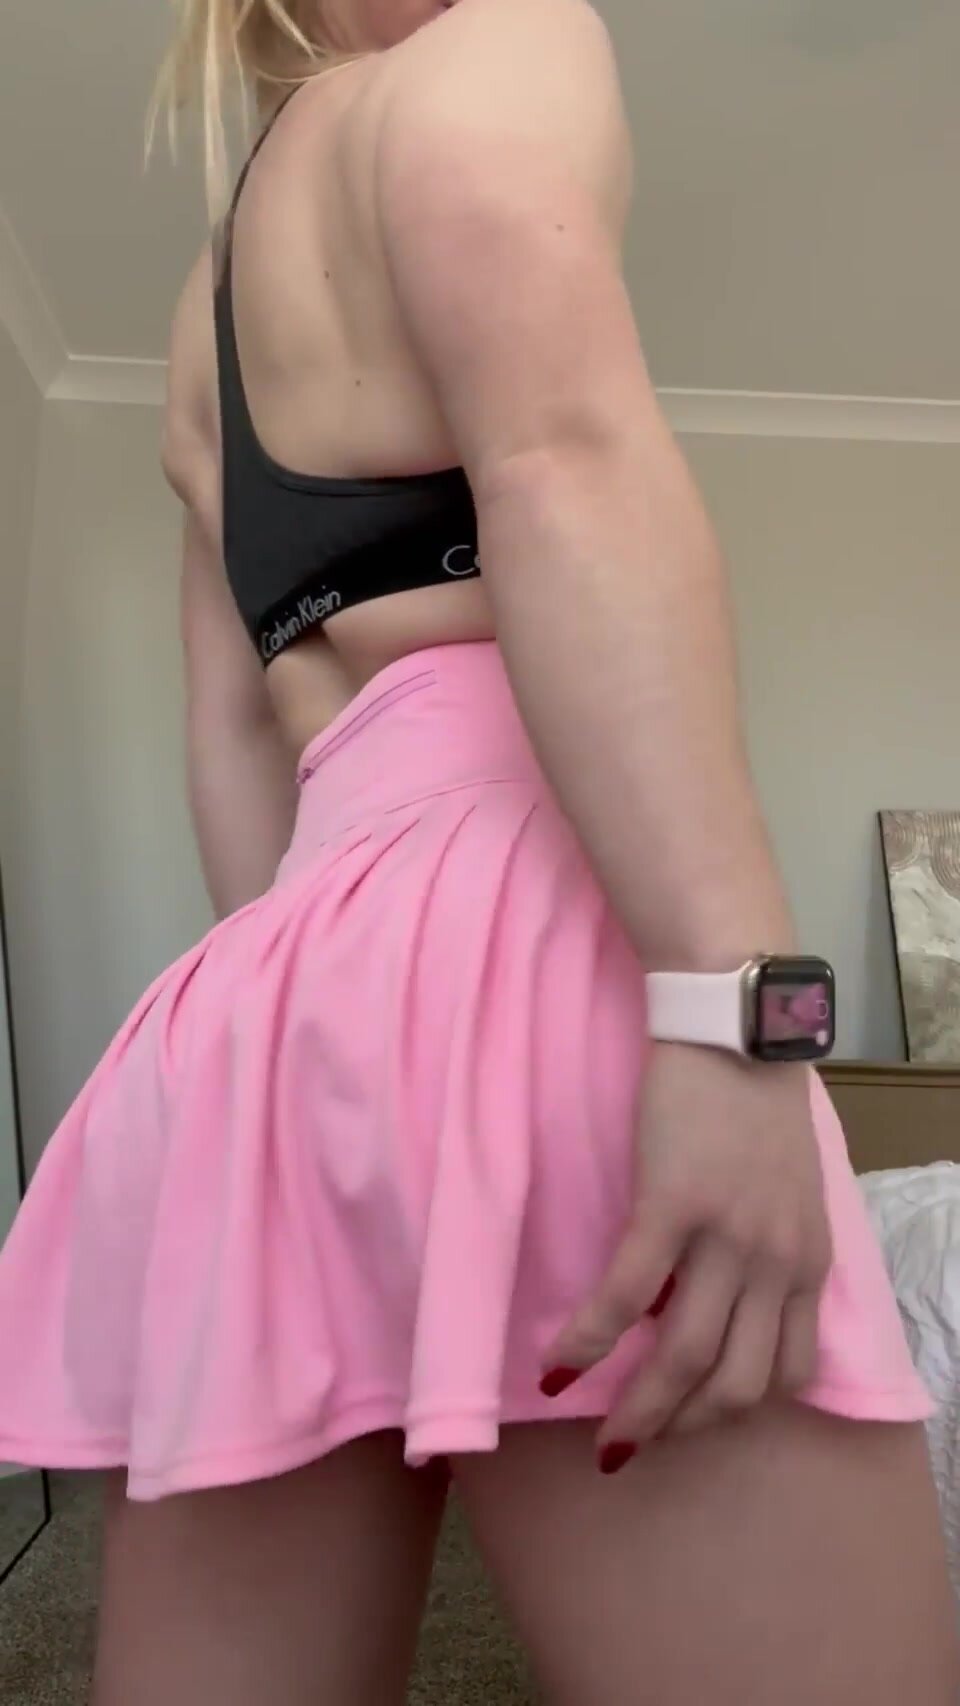 You can fuck me but the skirt stays on